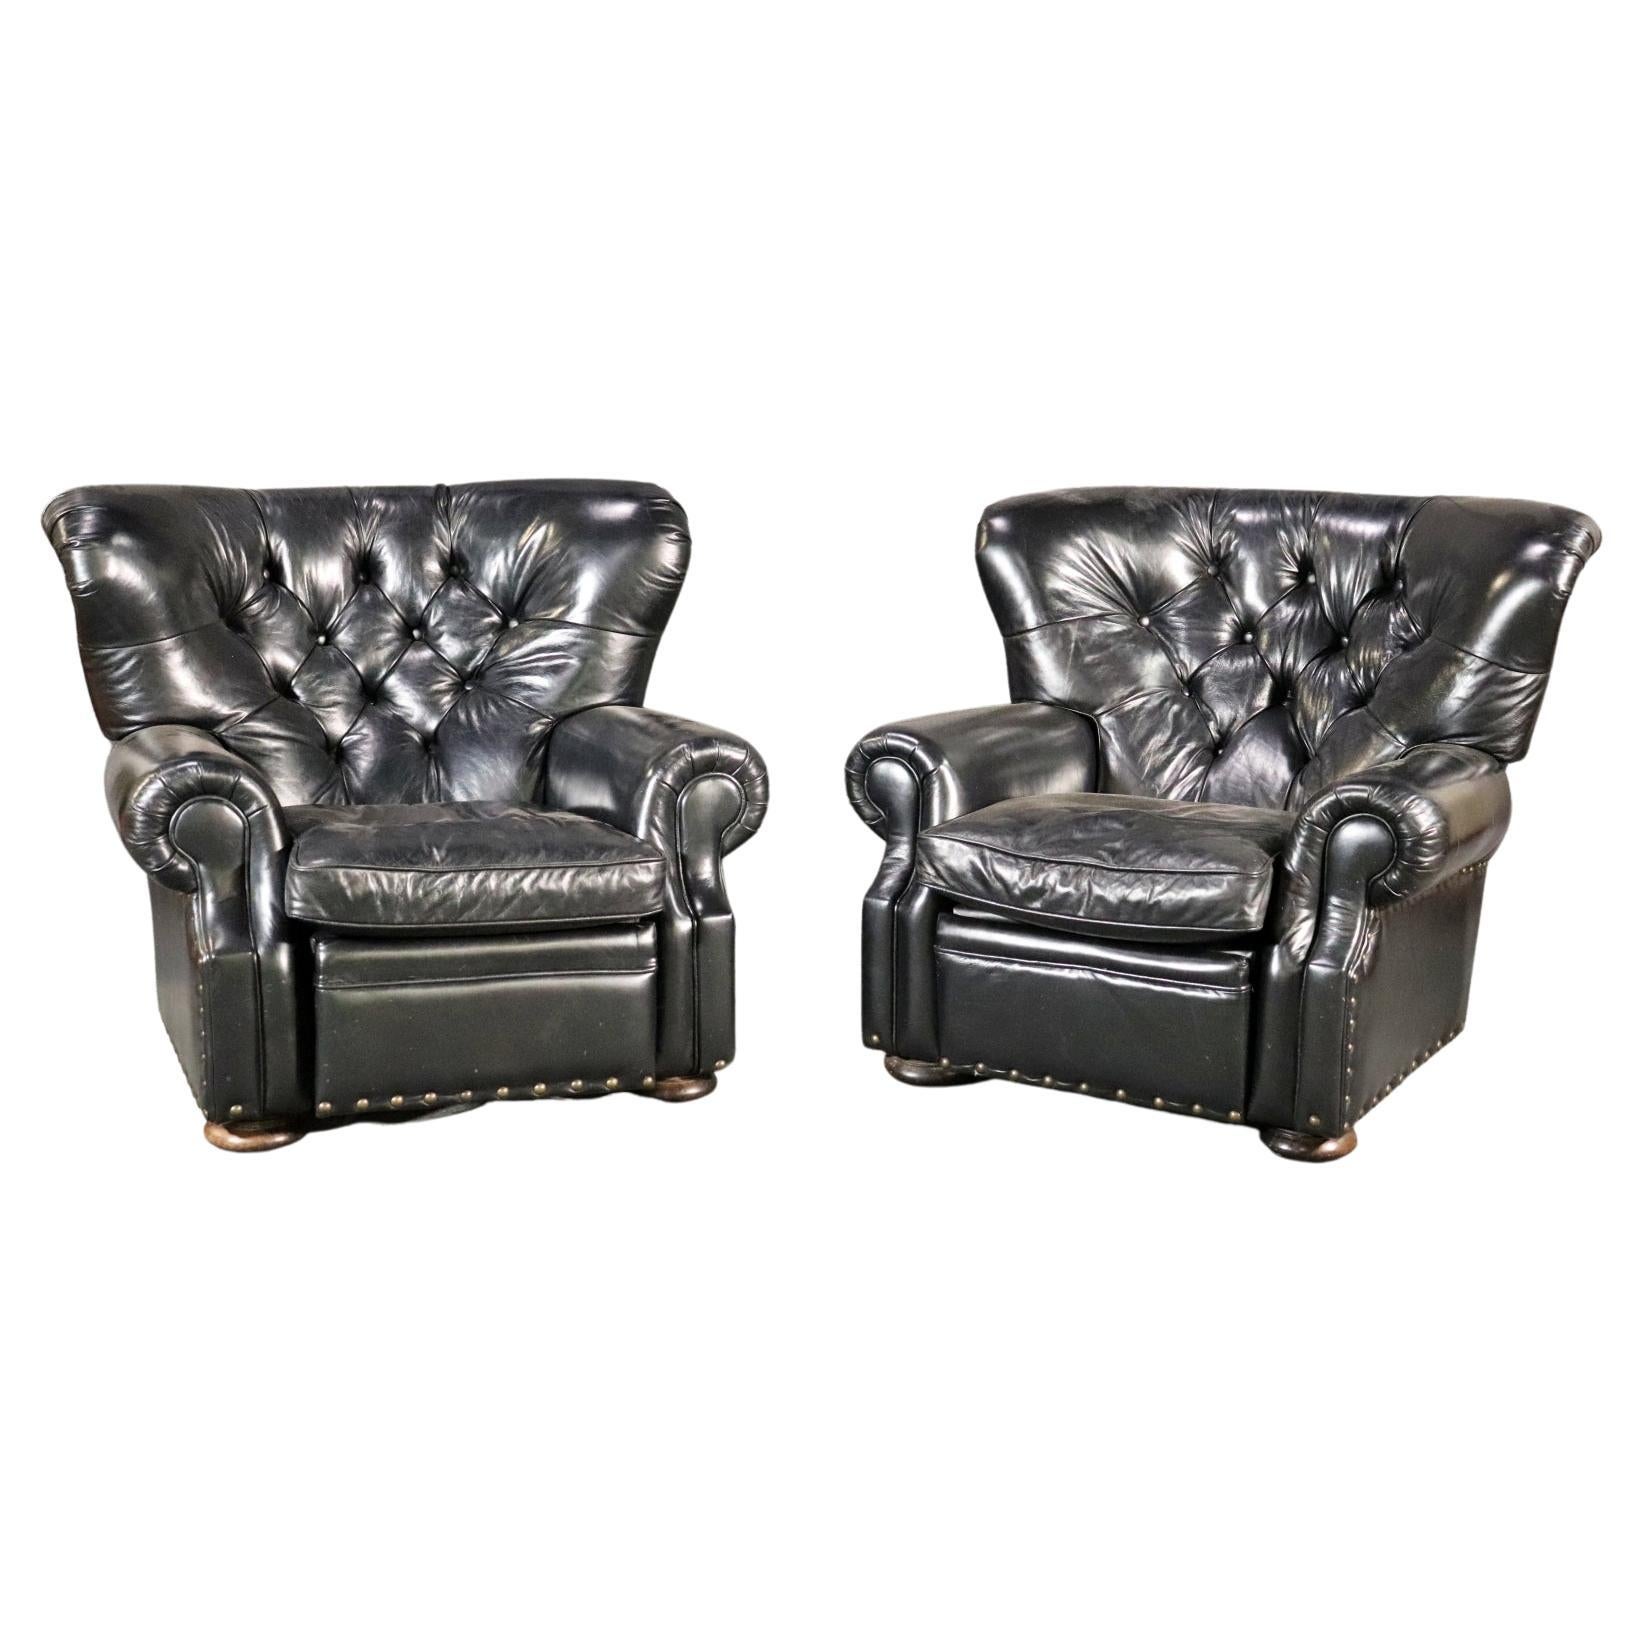 Pair of Tufted English Georgian Style Club Chairs Recliners  For Sale